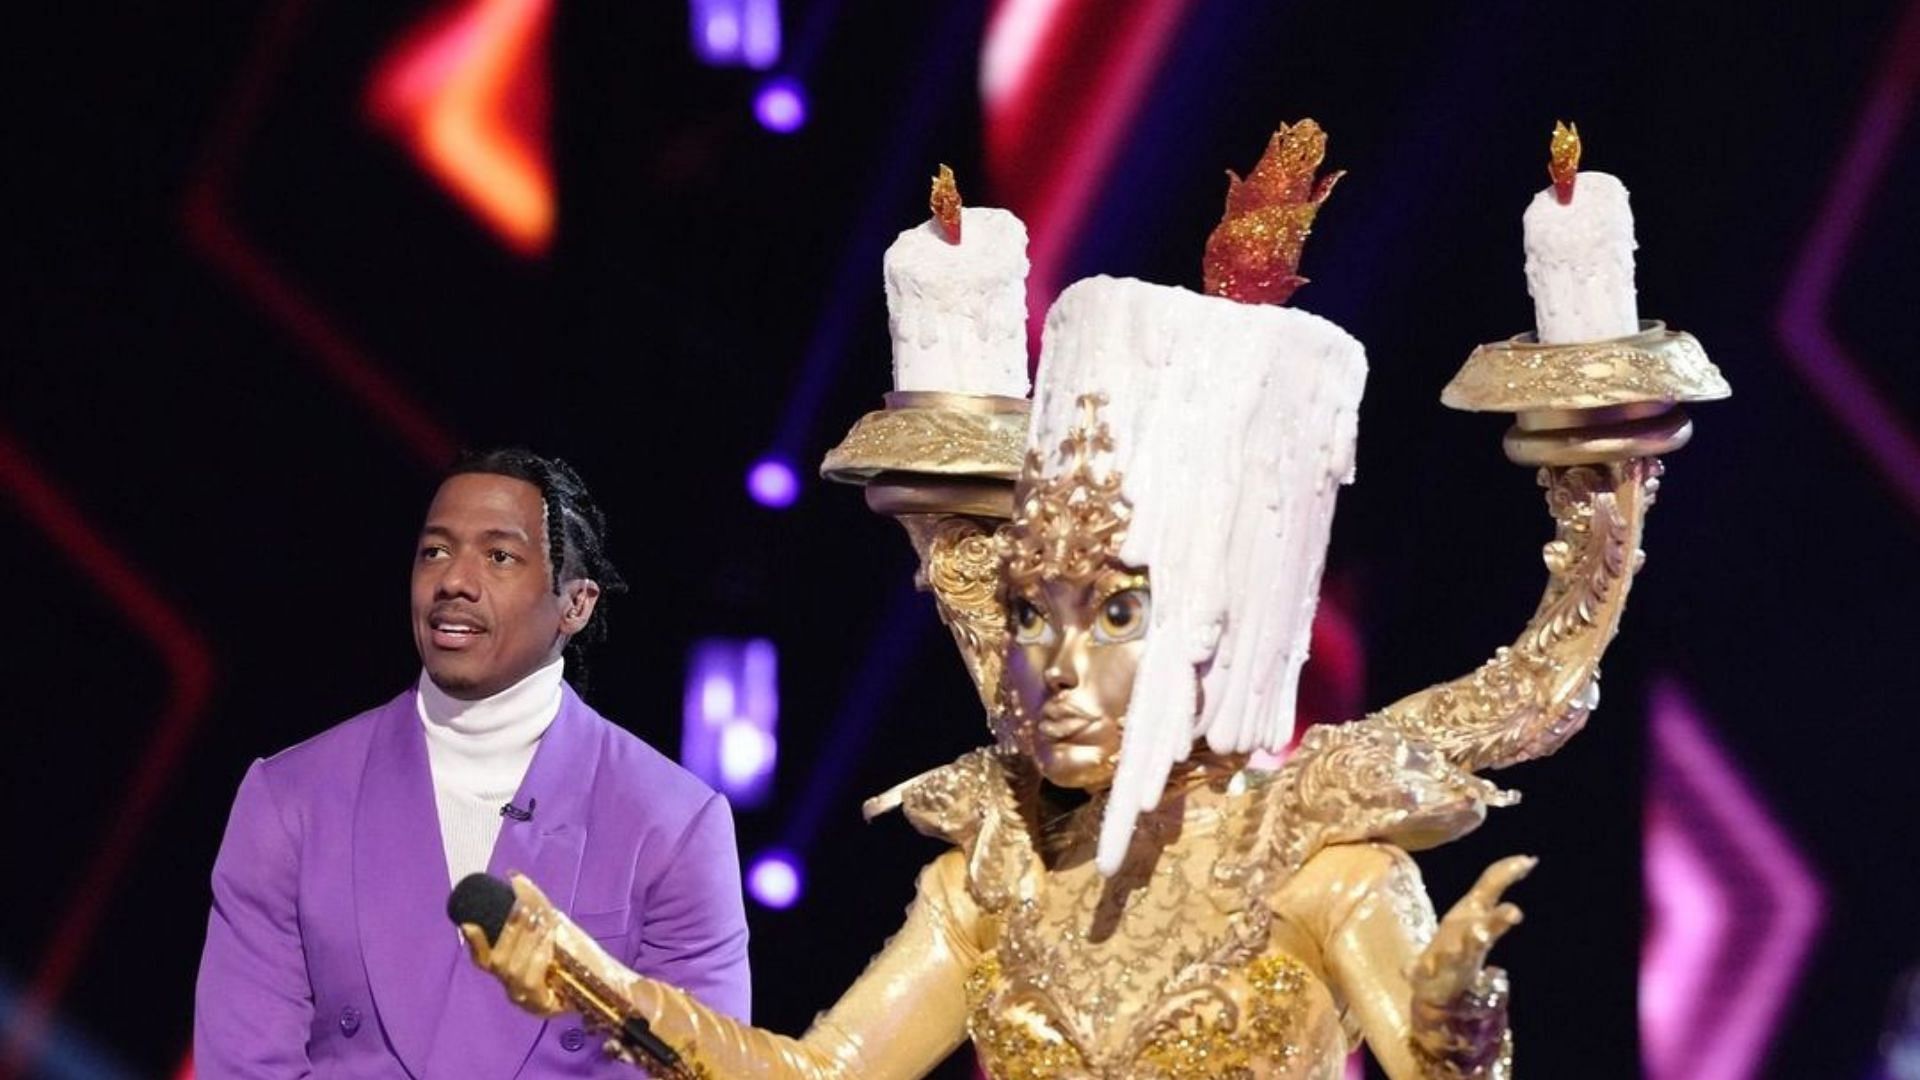 The Masked Singer' crowns Cow the winner of Season 10